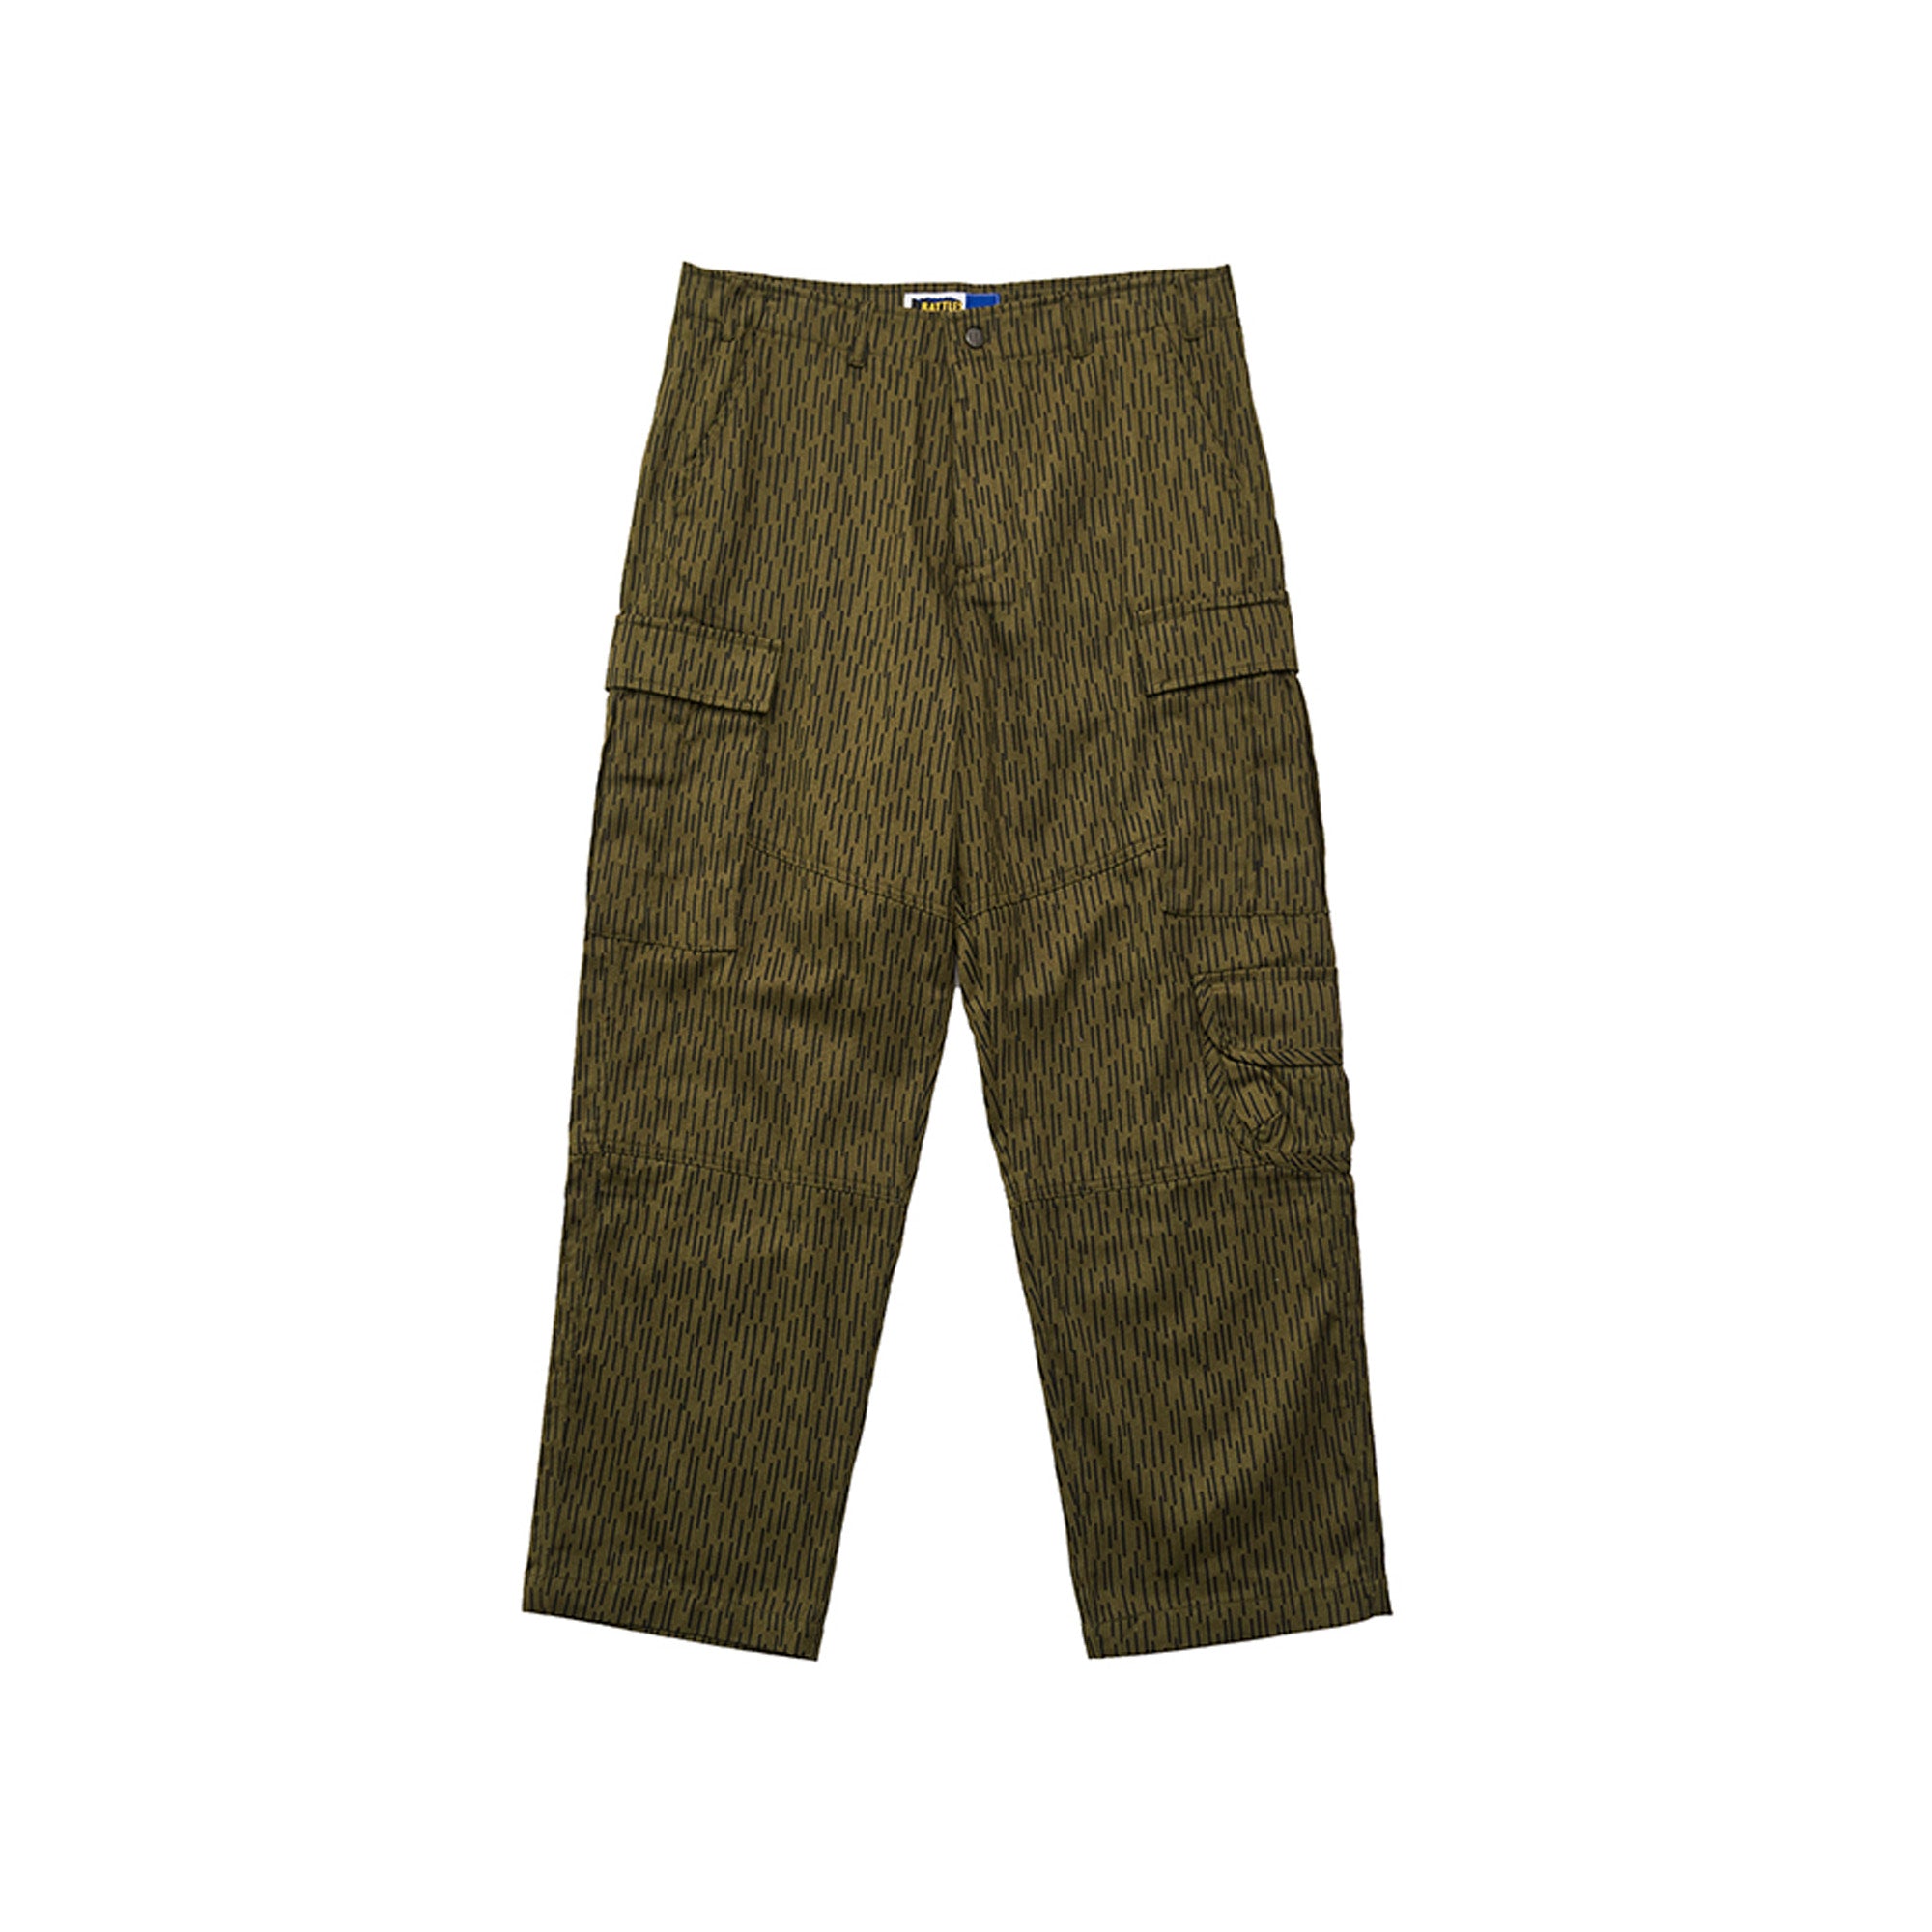 Embroidered Camouflage Work Pants